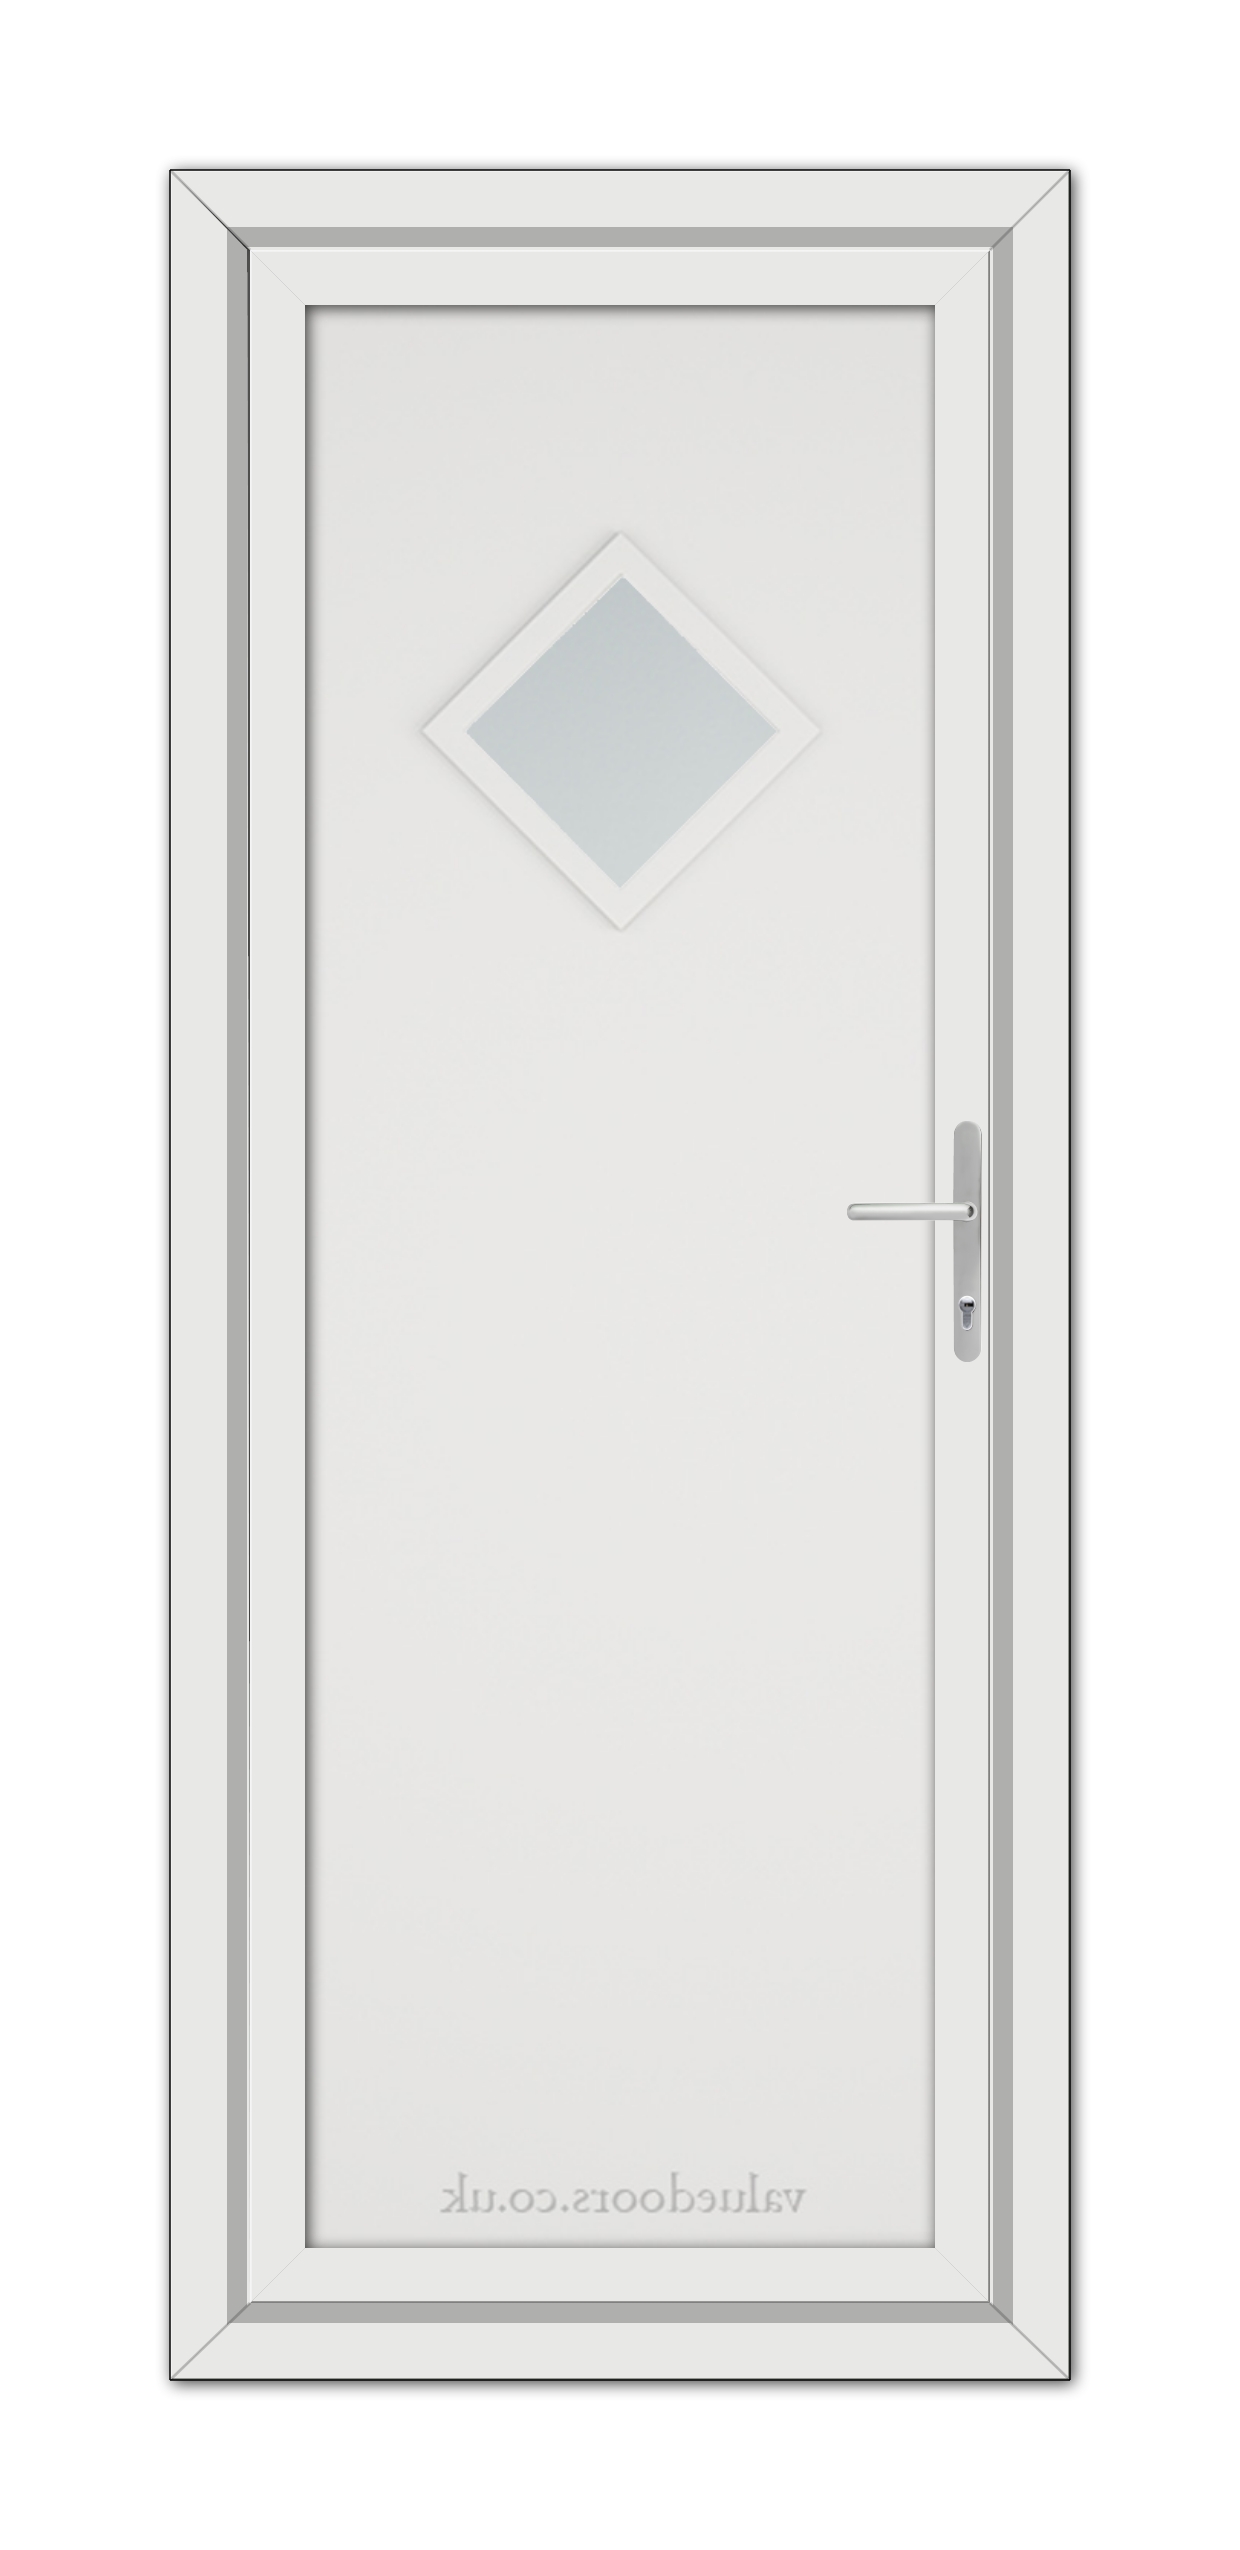 A vertical image of a closed White Modern 5131 uPVC door featuring a diamond-shaped window at the top and a metallic handle on the right side.